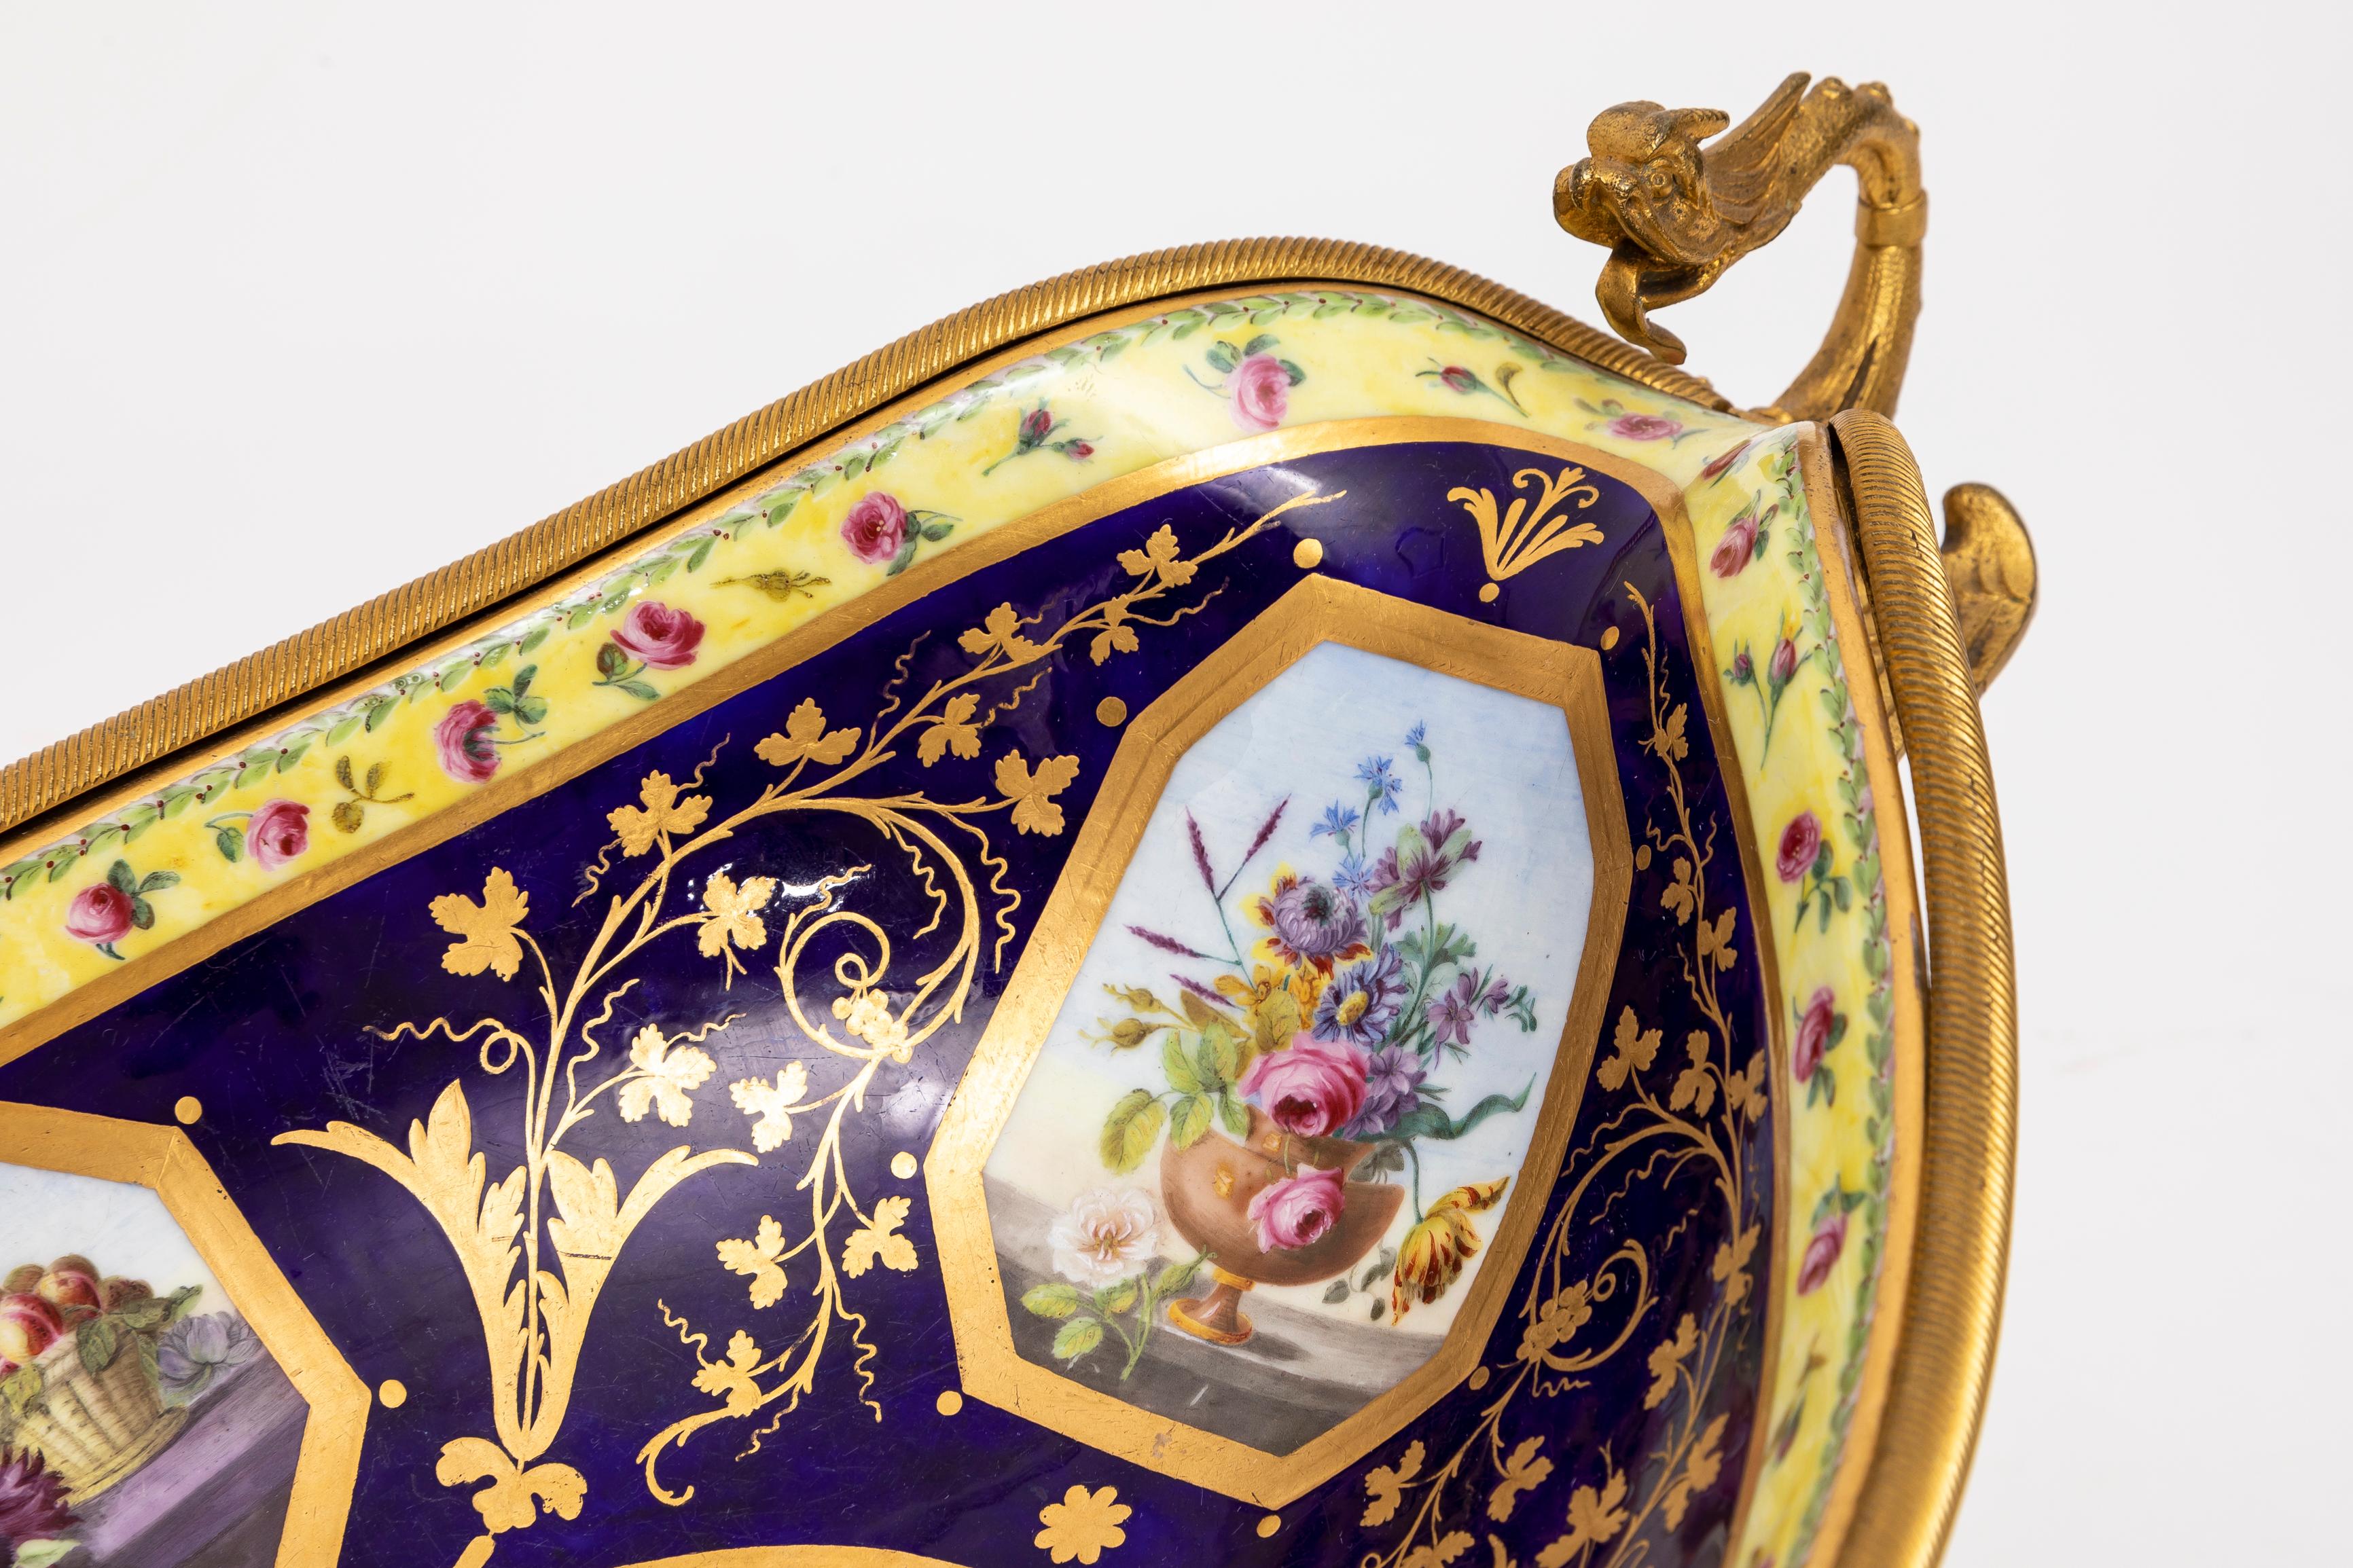 An 18th C. French Ormolu Mounted Sevres Porcelain Centerpiece w/ Dragon Handles For Sale 2